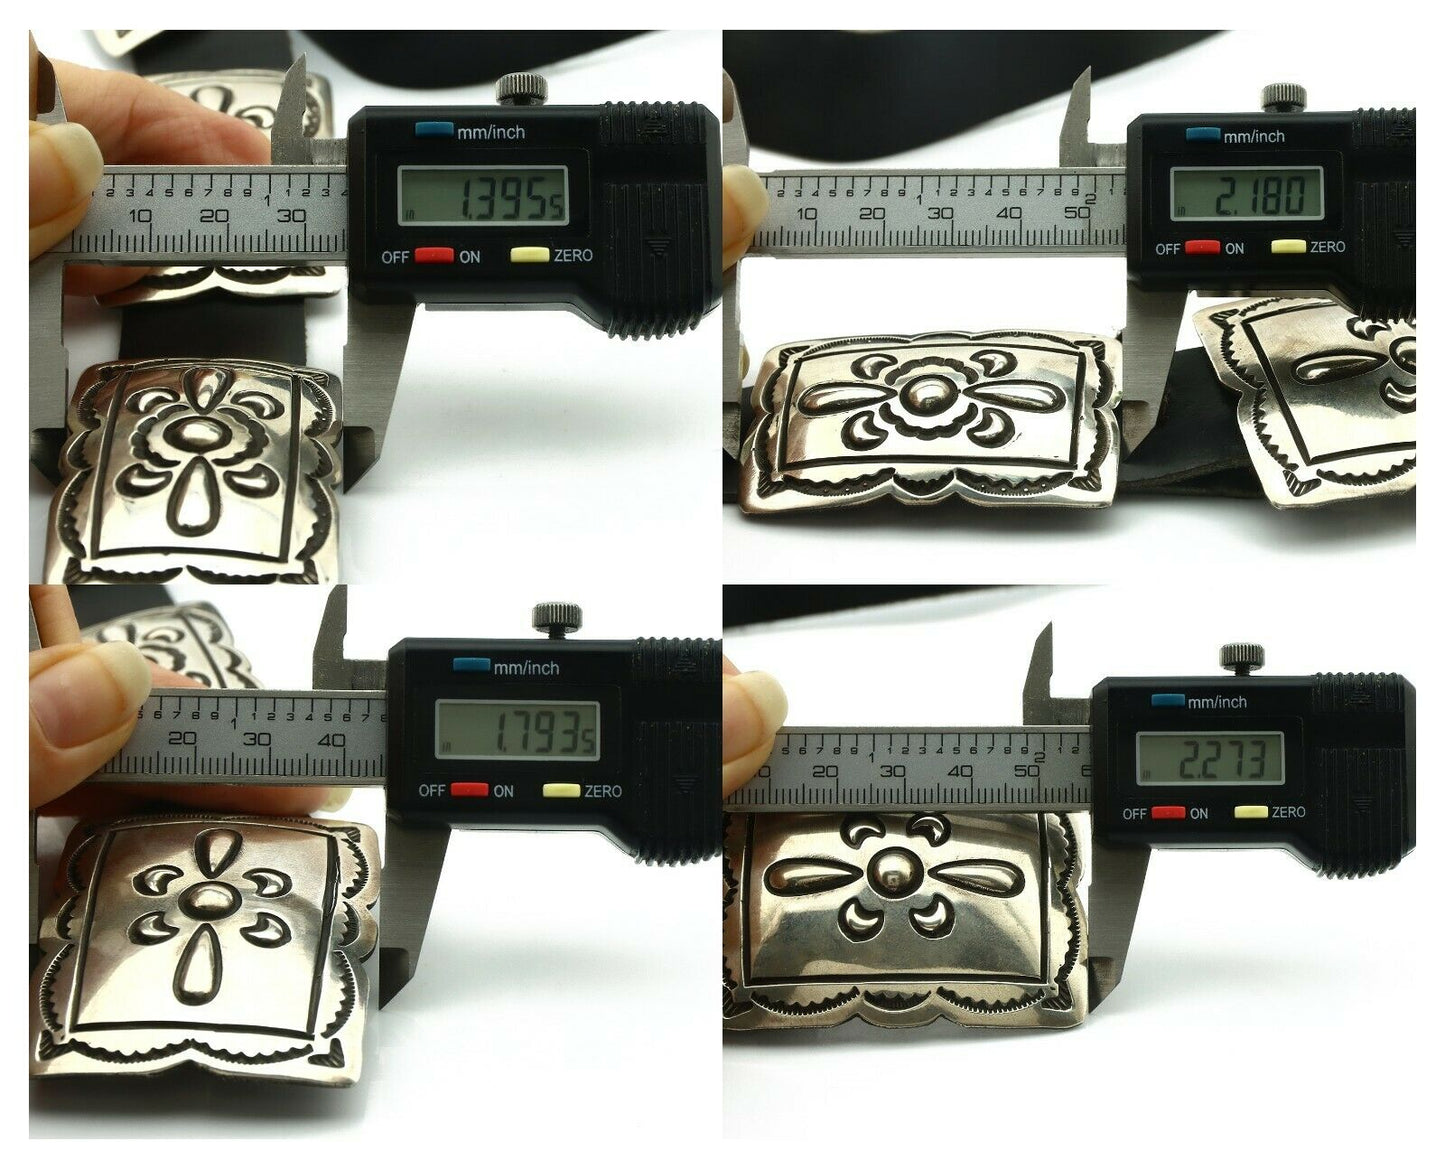 Navajo Concho Belt .925 Silver Hand Stamped Signed Native American C.80's